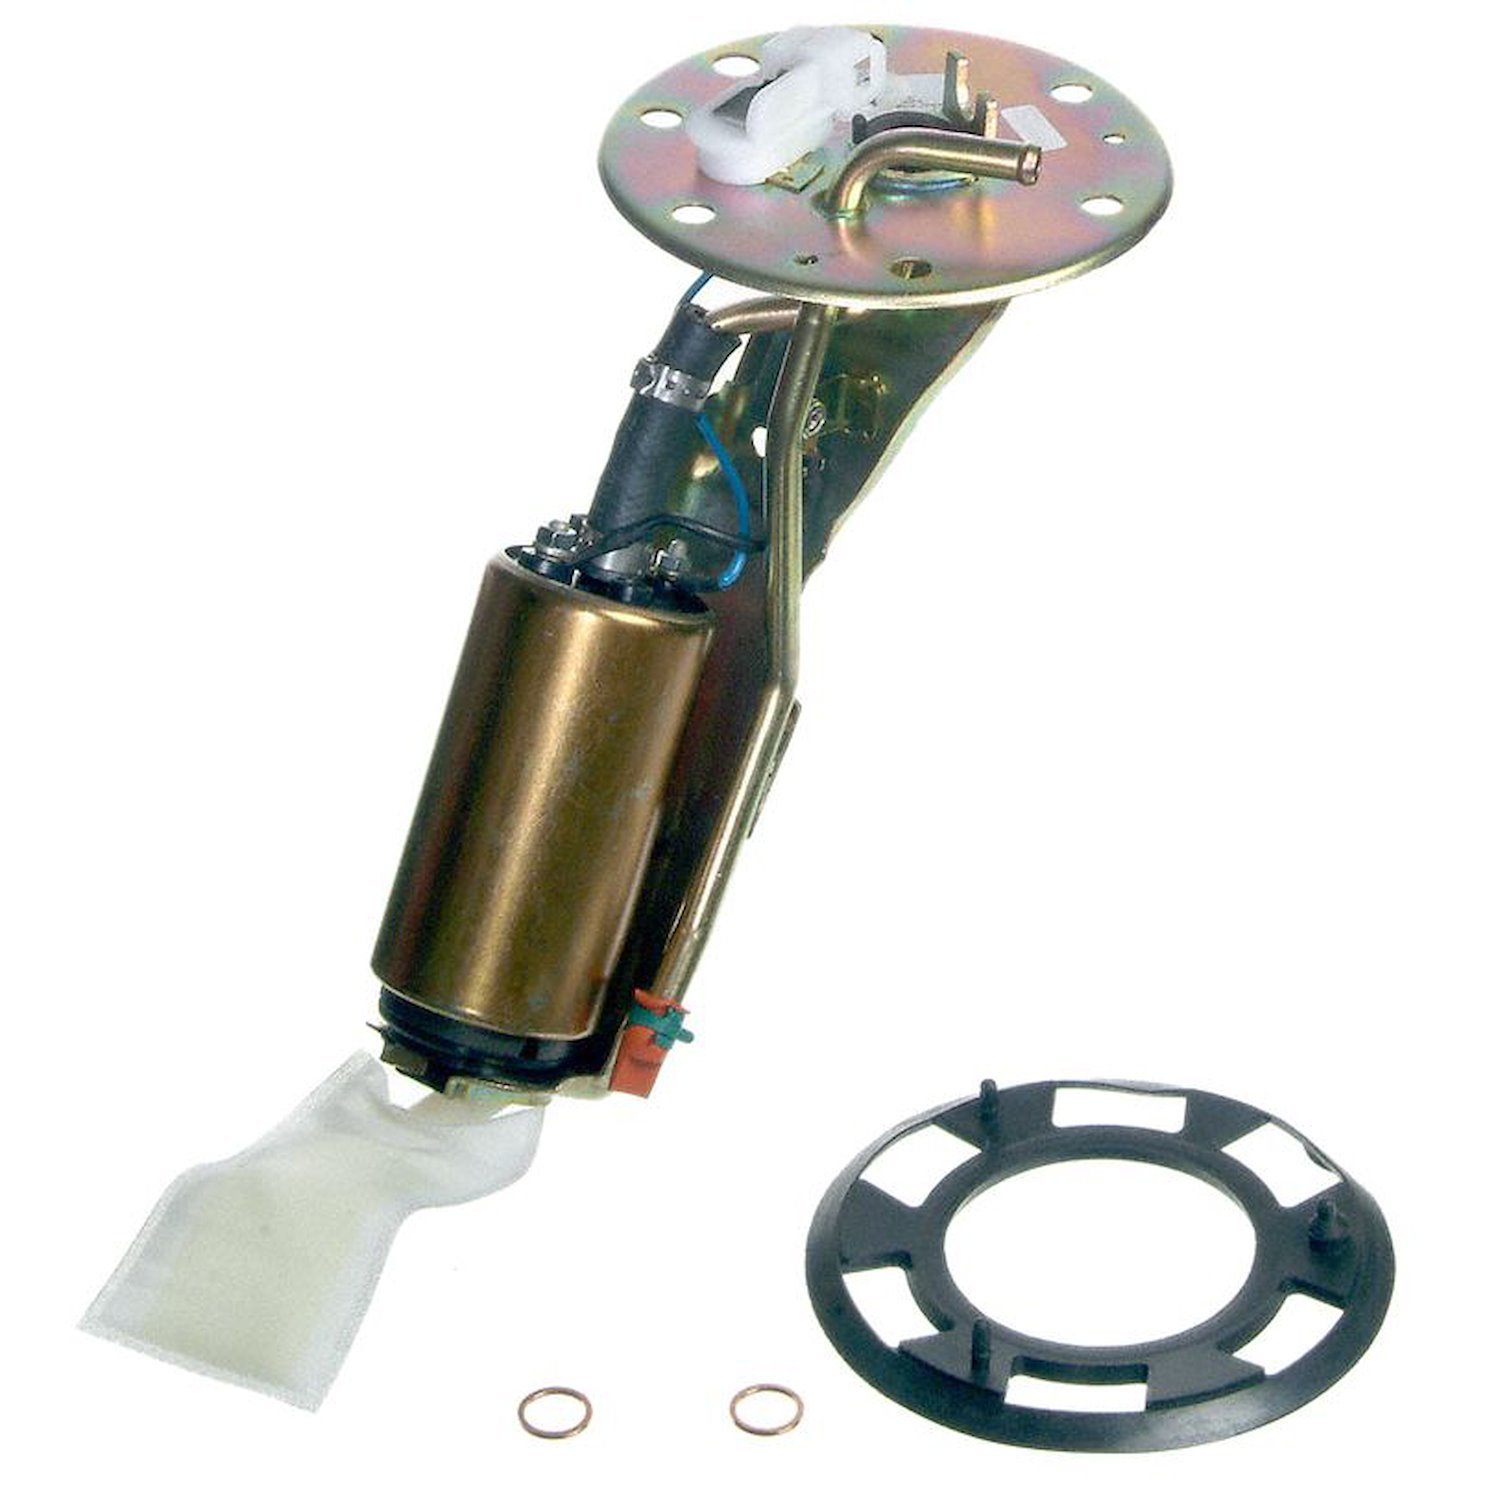 Replacement Fuel Pump Hanger Assembly for 1986-1989 Honda Accord